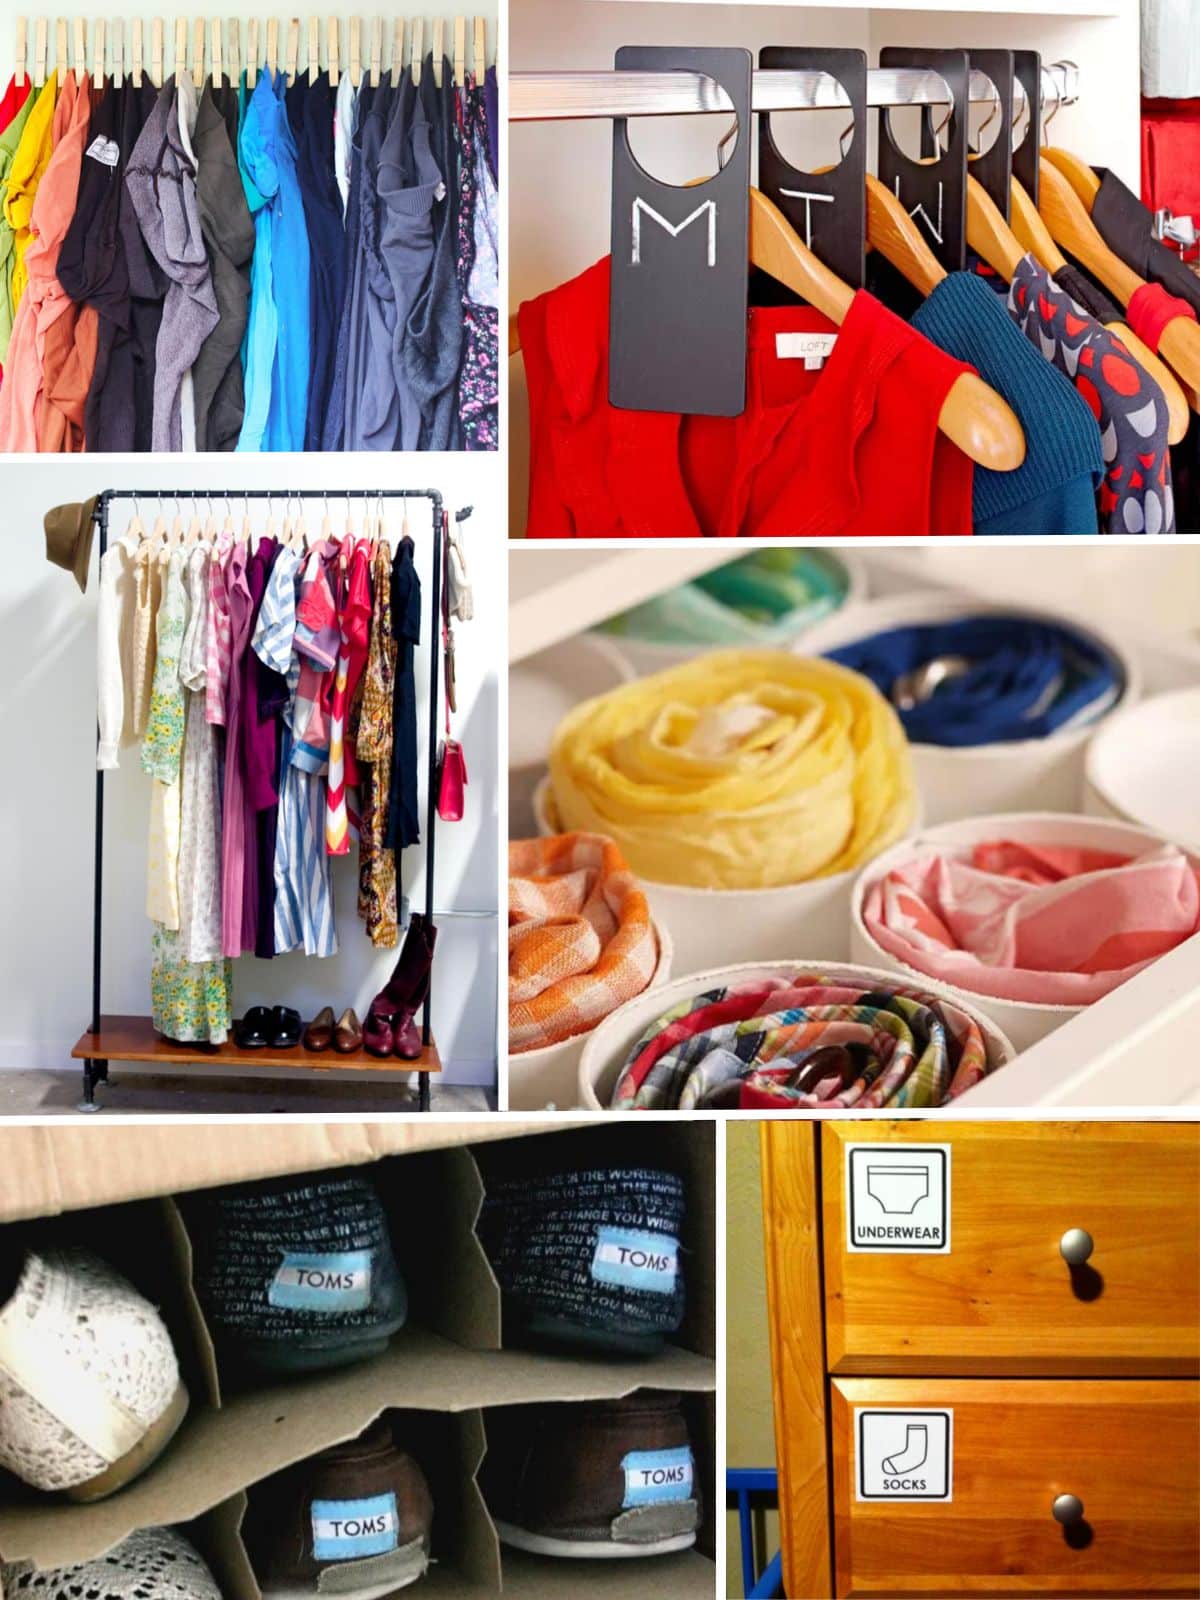 40 Brilliant Closet and Drawer Organizing Projects - DIY & Crafts